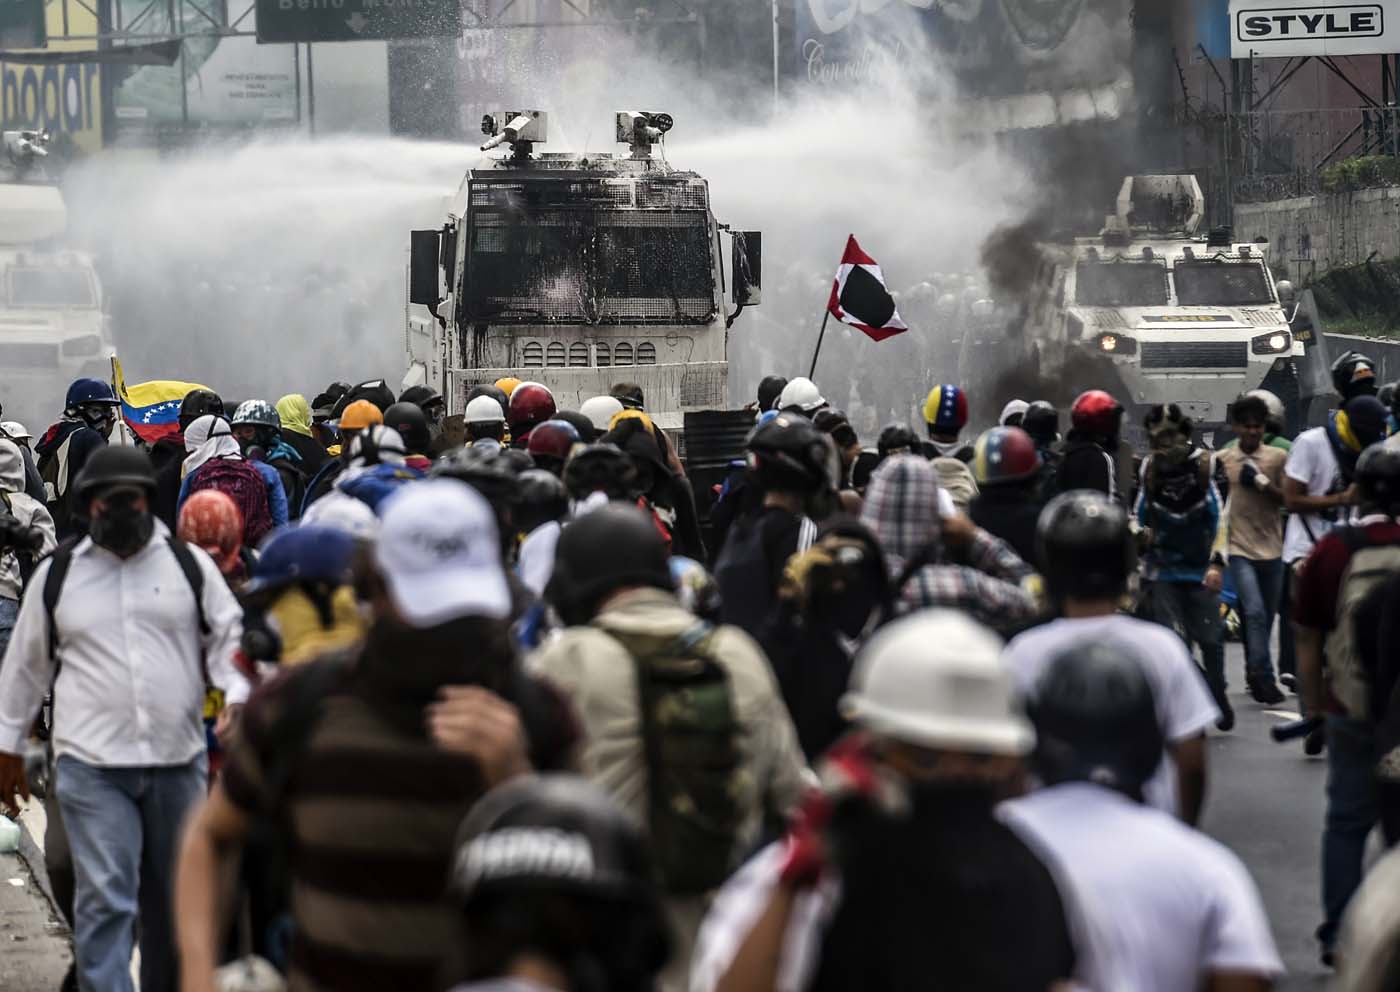 Opposition activists clash with riot police during a demonstration against the government of President Nicolas Maduro along the Francisco Fajardo highway in Caracas on June 19, 2017. Near-daily protests against President Nicolas Maduro began on April 1, with demonstrators demanding his removal and the holding of new elections. The demonstrations have often turned violent with 73 people killed and more than 1,000 injured so far, prosecutors say, and more than 3,000 arrested, according to the NGO Forum Penal. / AFP PHOTO / Juan BARRETO